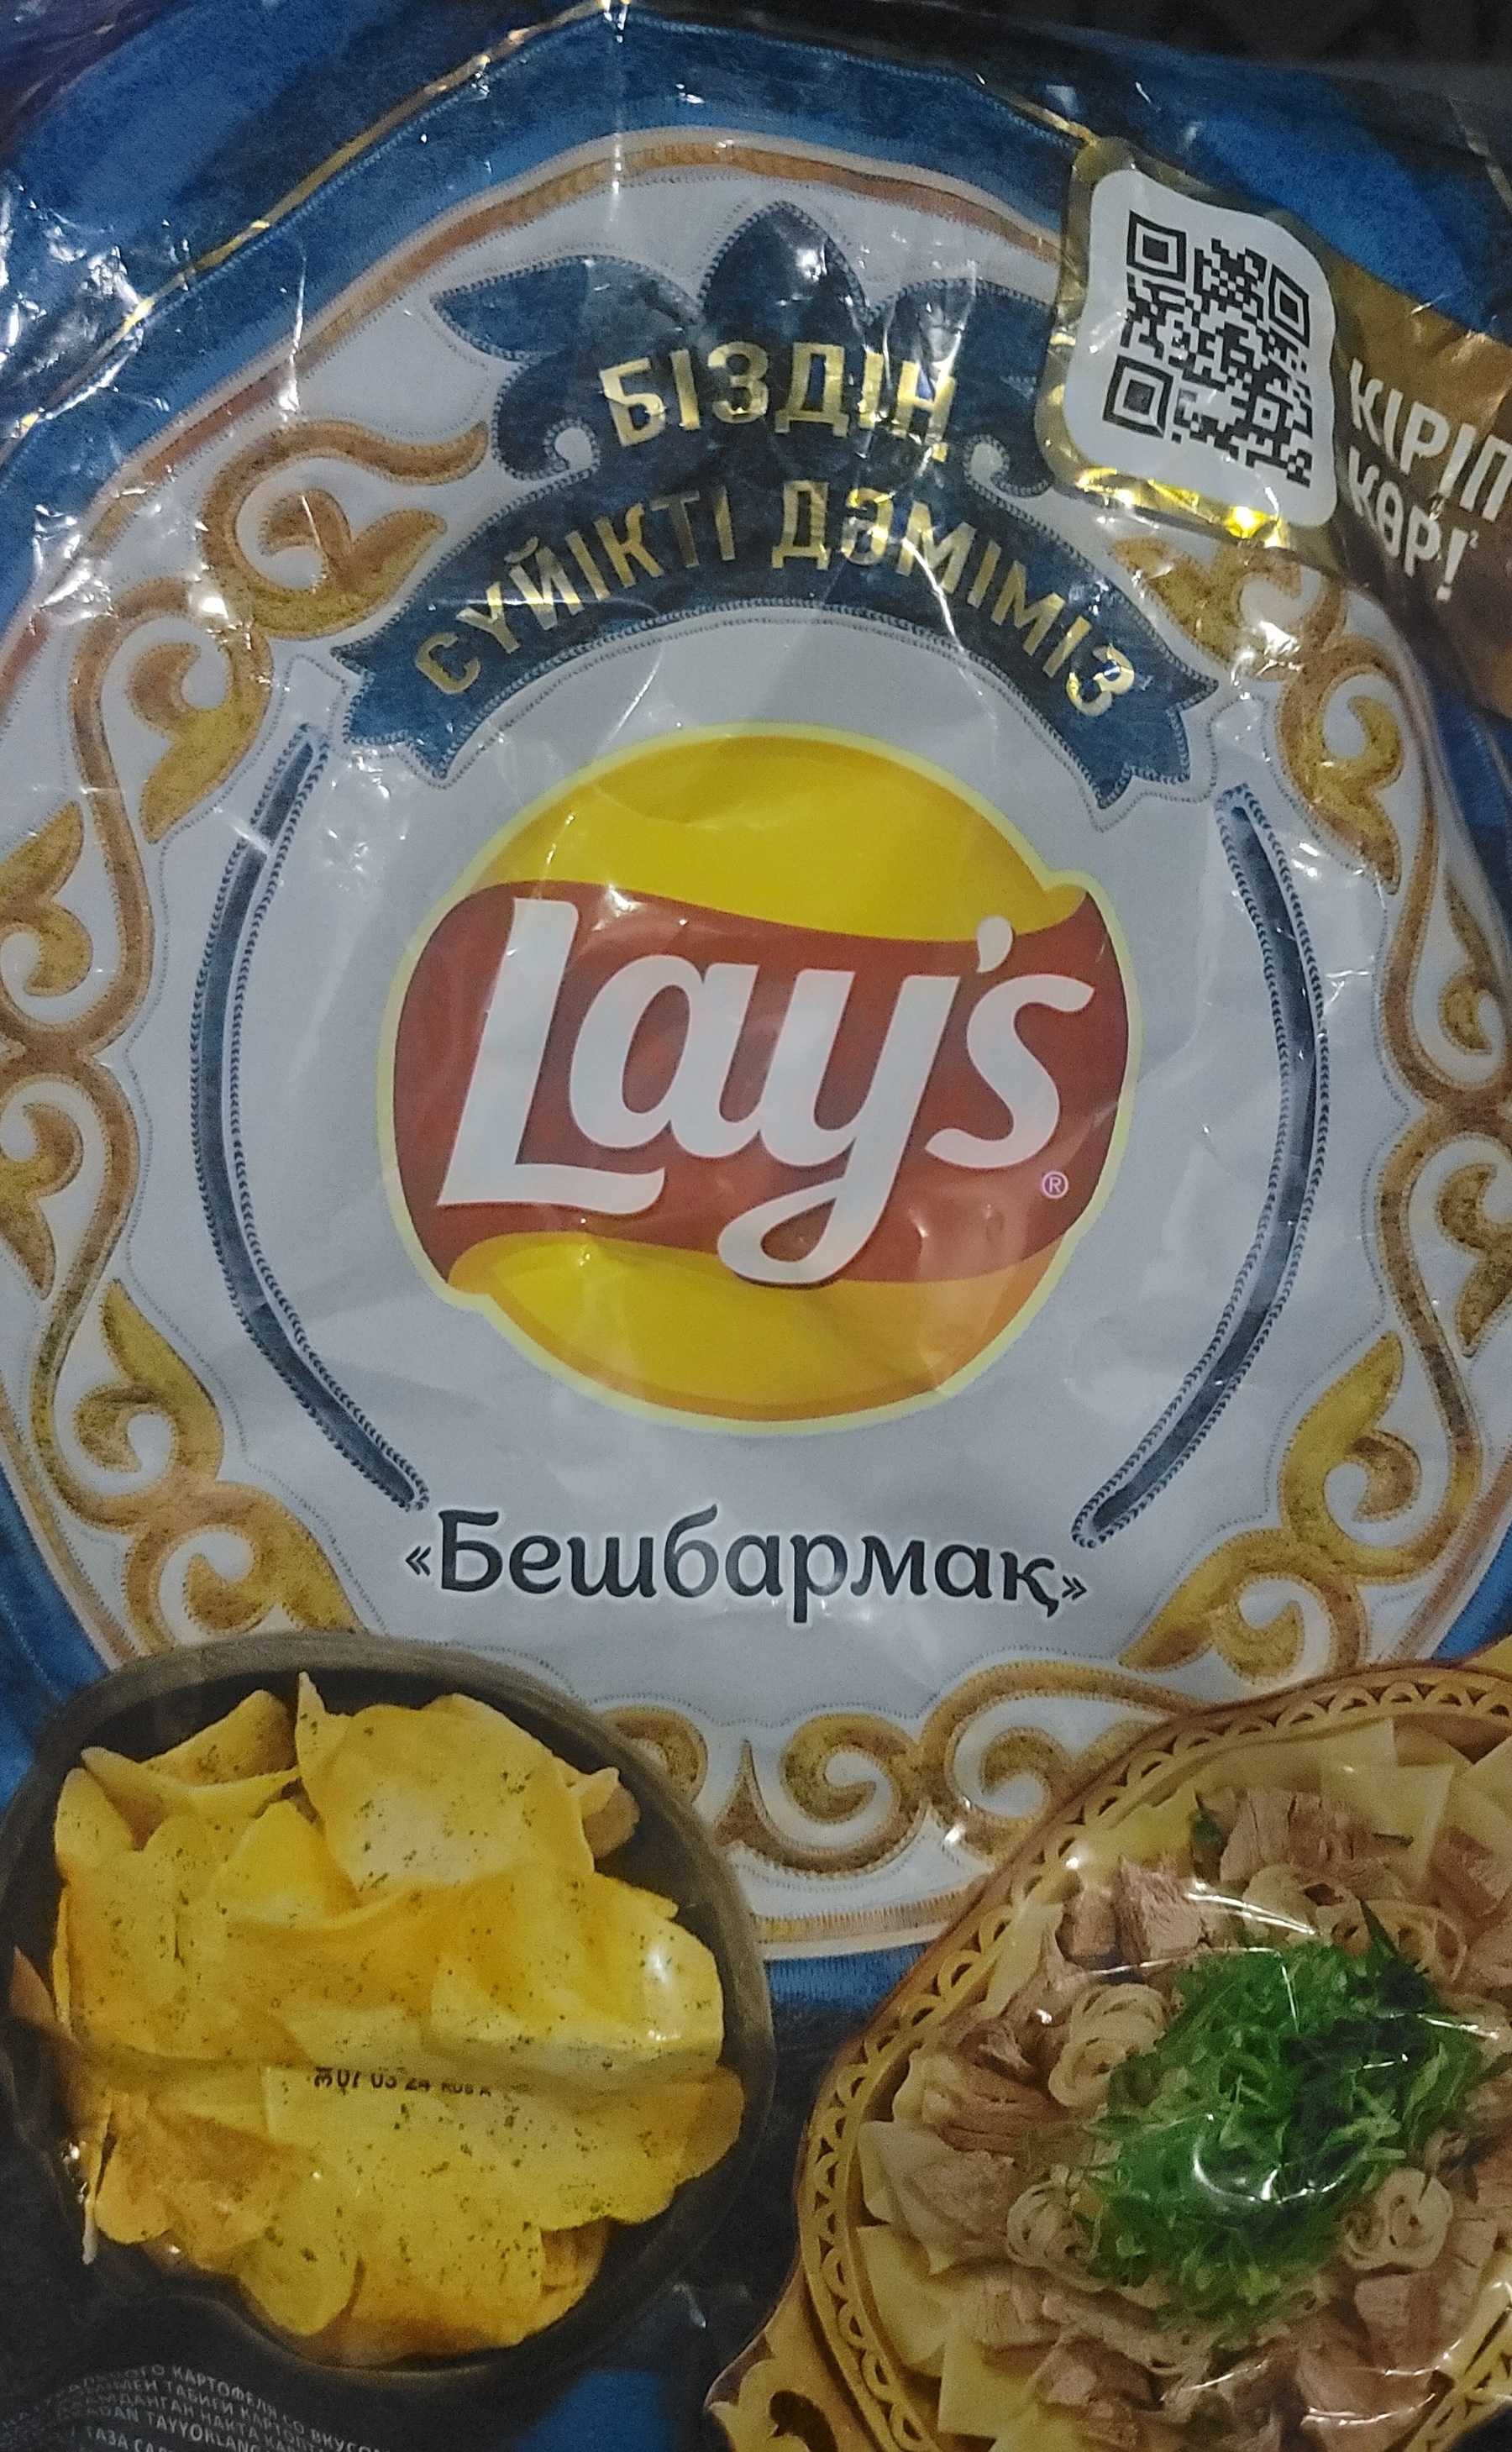 bag of Lay's beshbarmak chips, with Kazakh on it